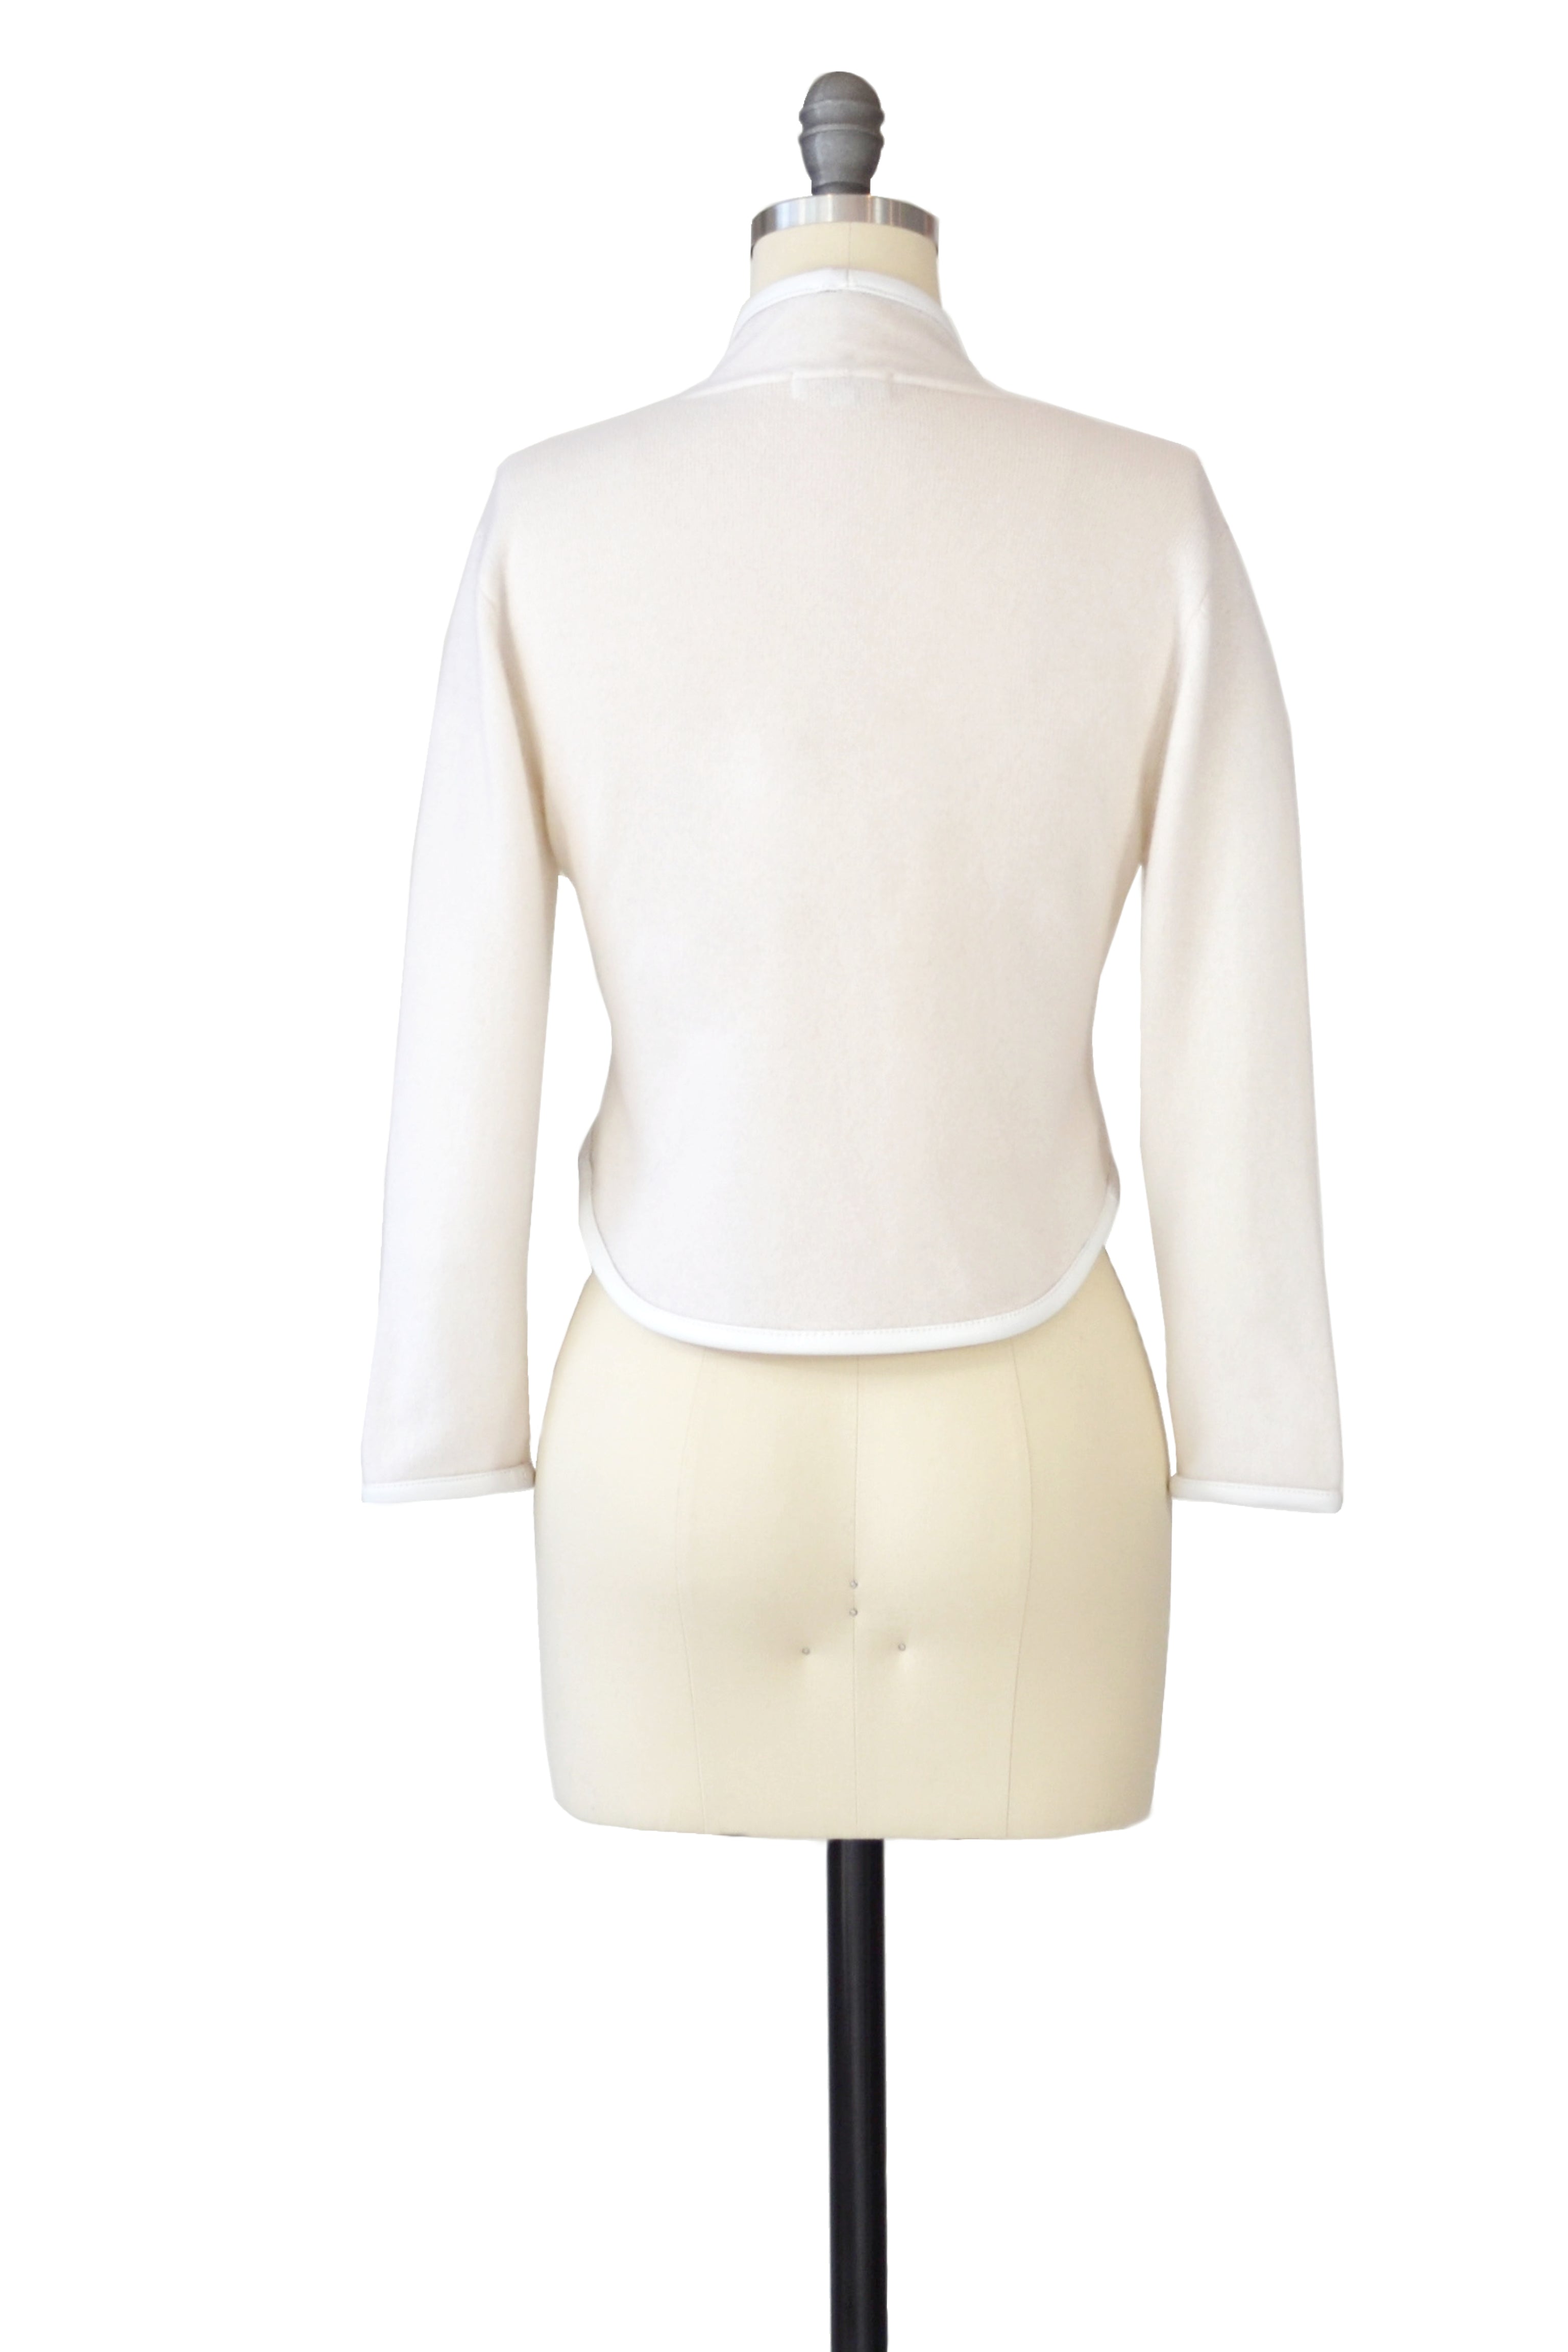 Cashmere Bolero with Leather Piping in Ivory